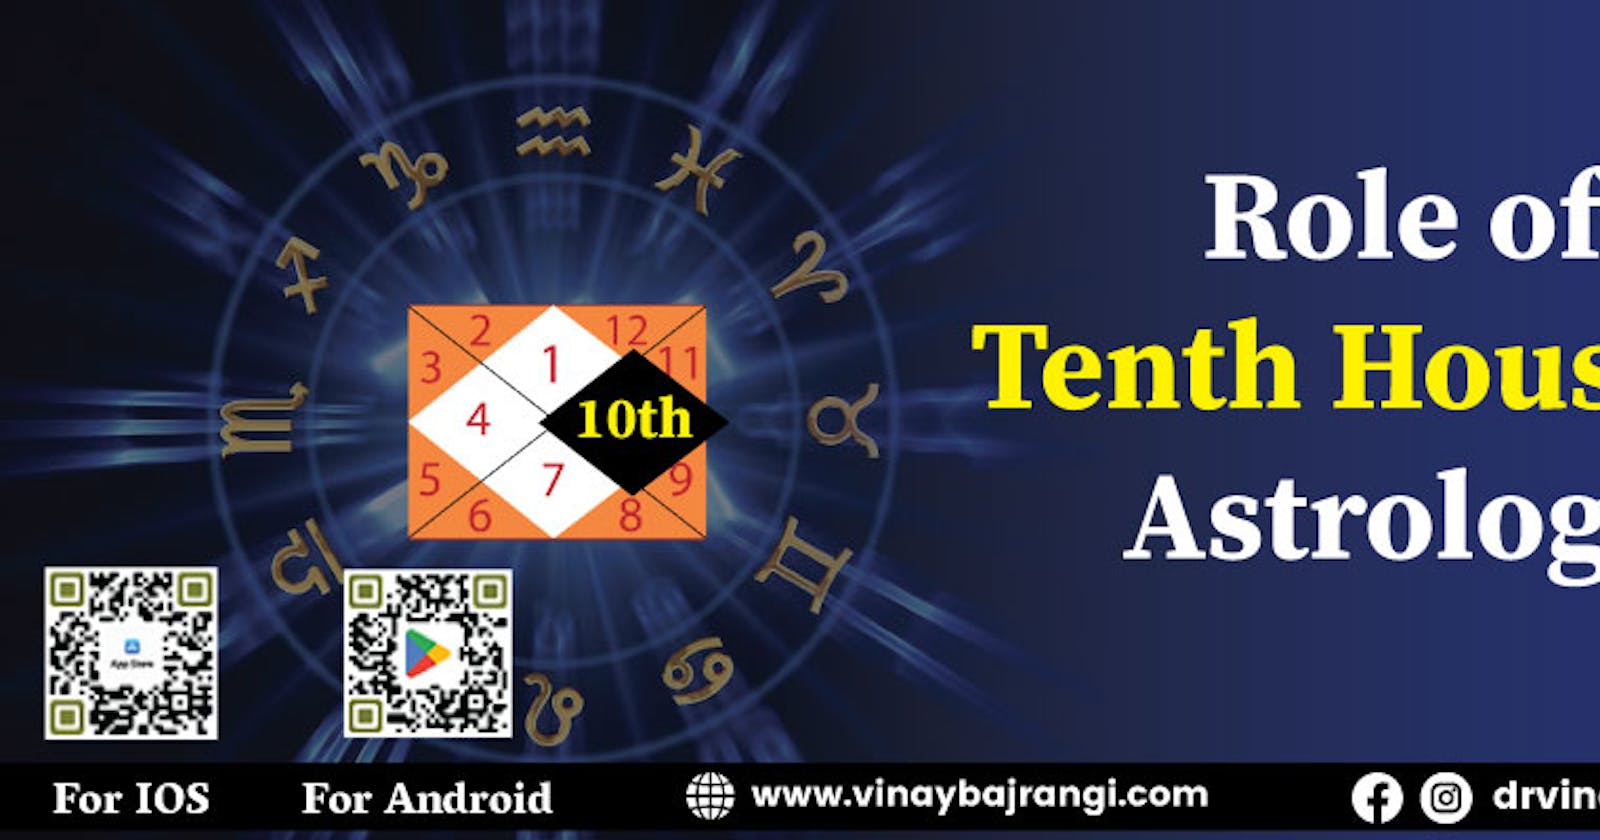 Role of Tenth House in Astrology